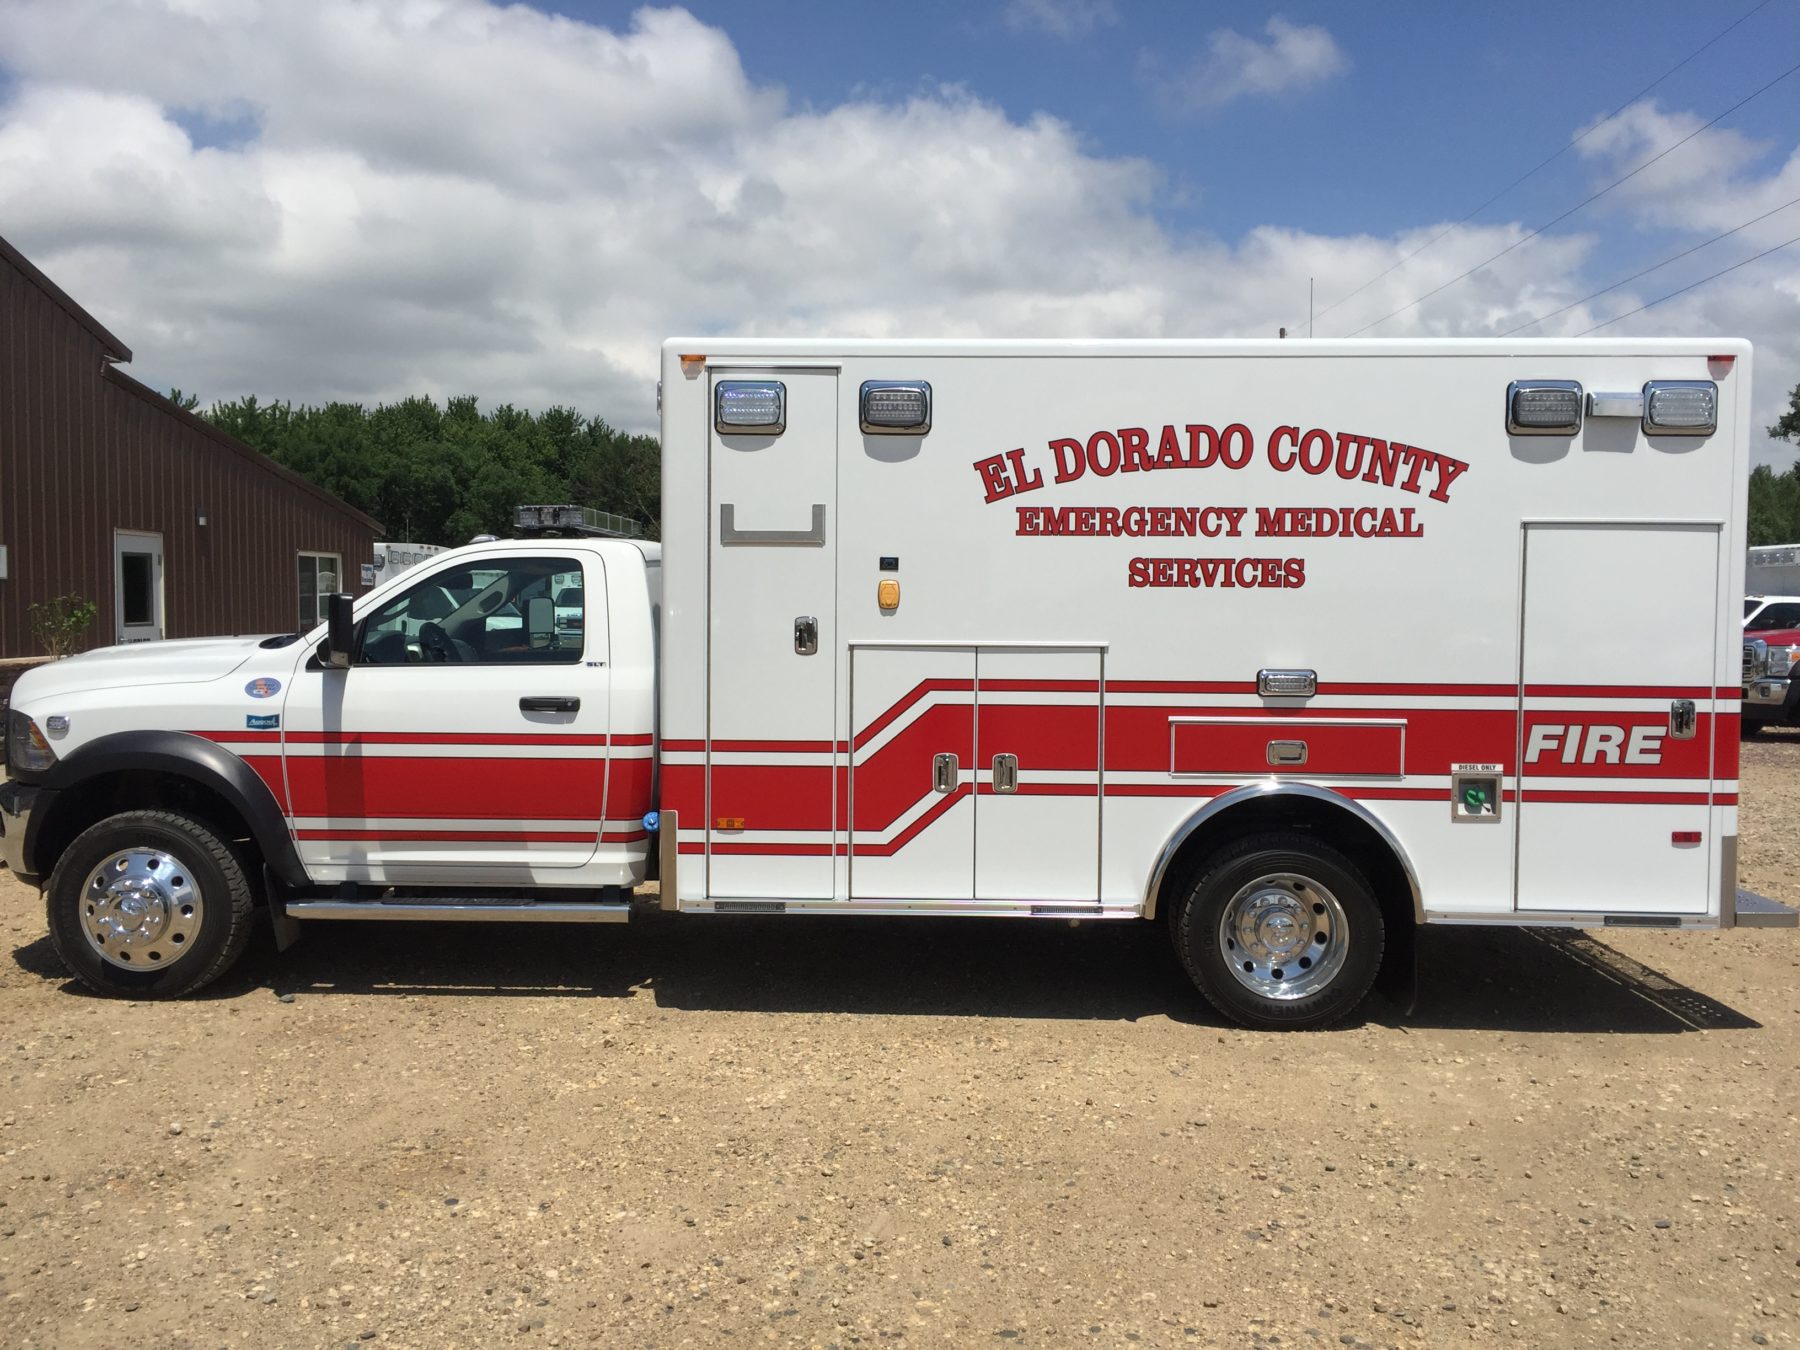 2017 Ram 4500 4x4 Heavy Duty Ambulance For Sale – Picture 3